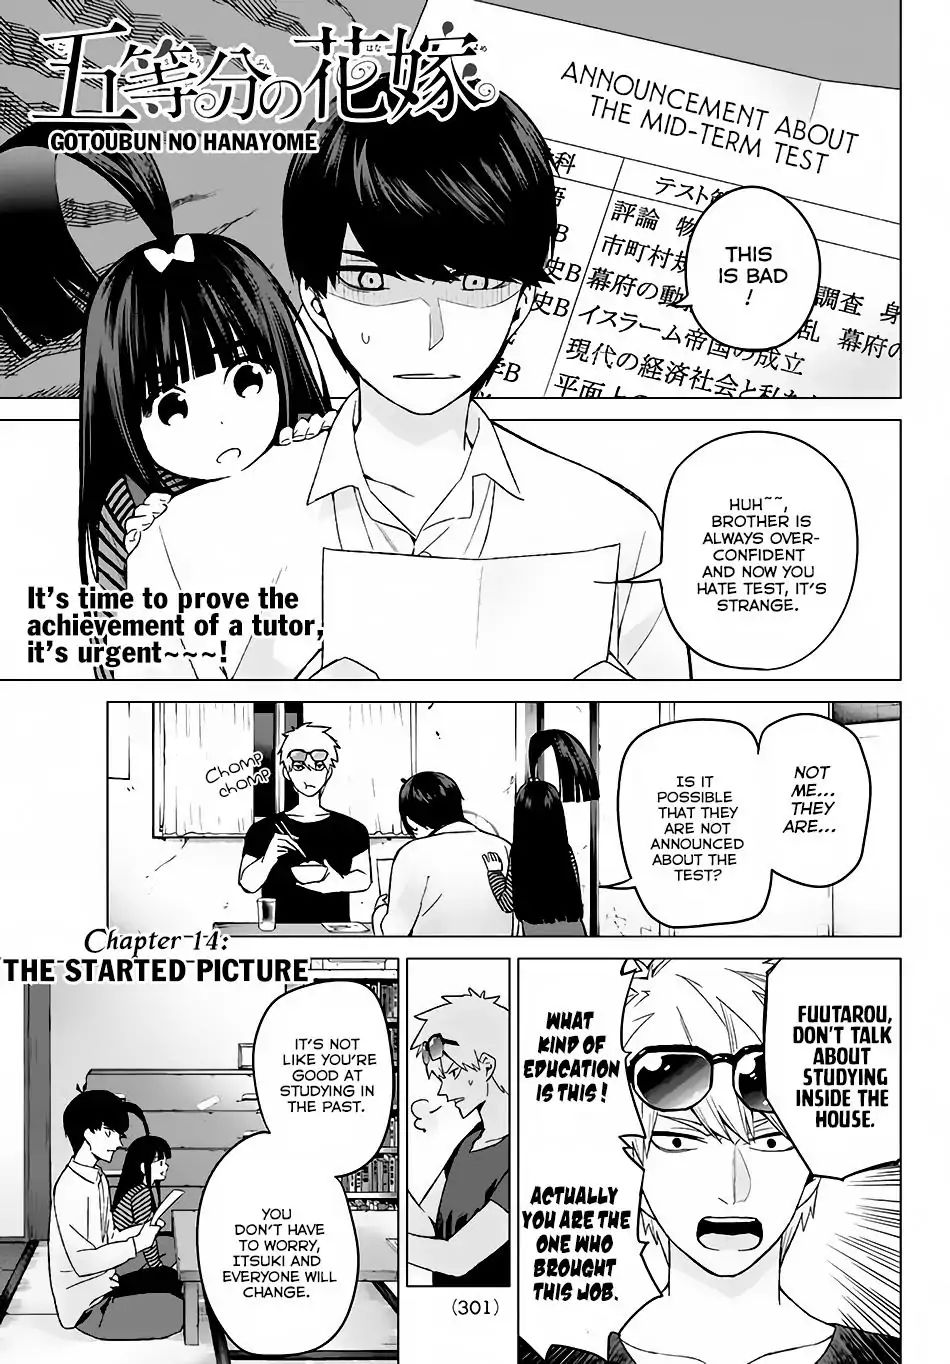 Go-Toubun No Hanayome Vol.2 Chapter 14: The Started Picture - Picture 2